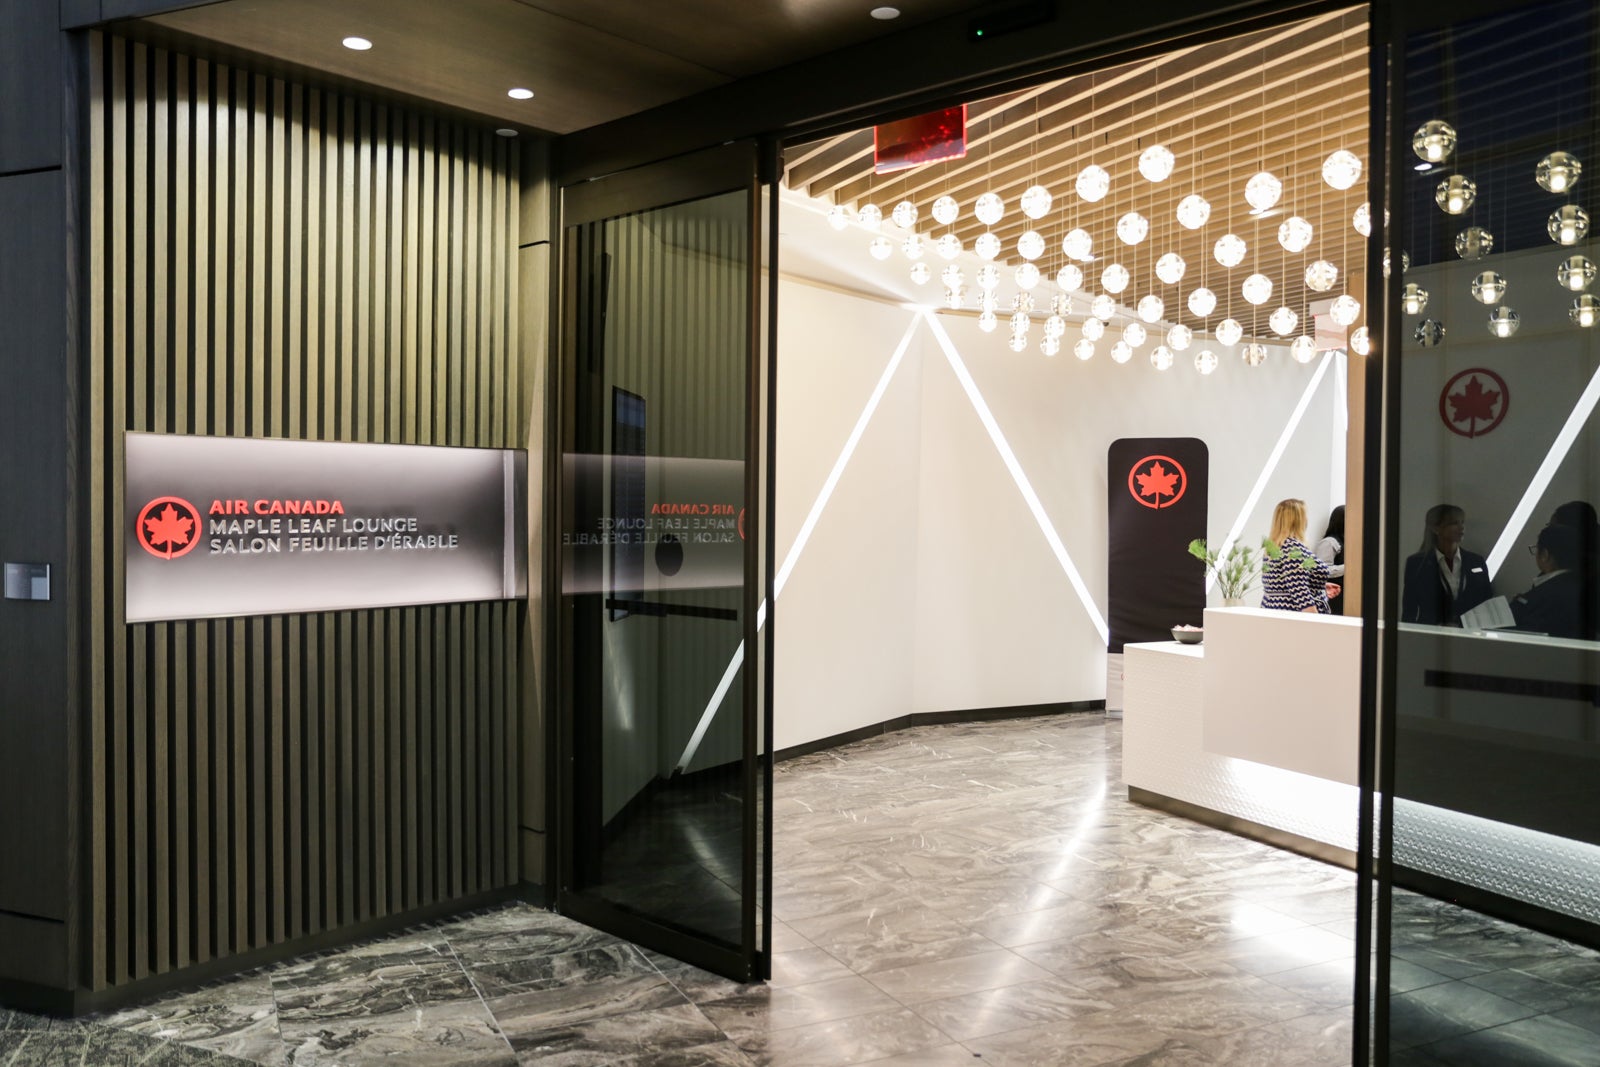 the entrance to an Air Canada airport lounge